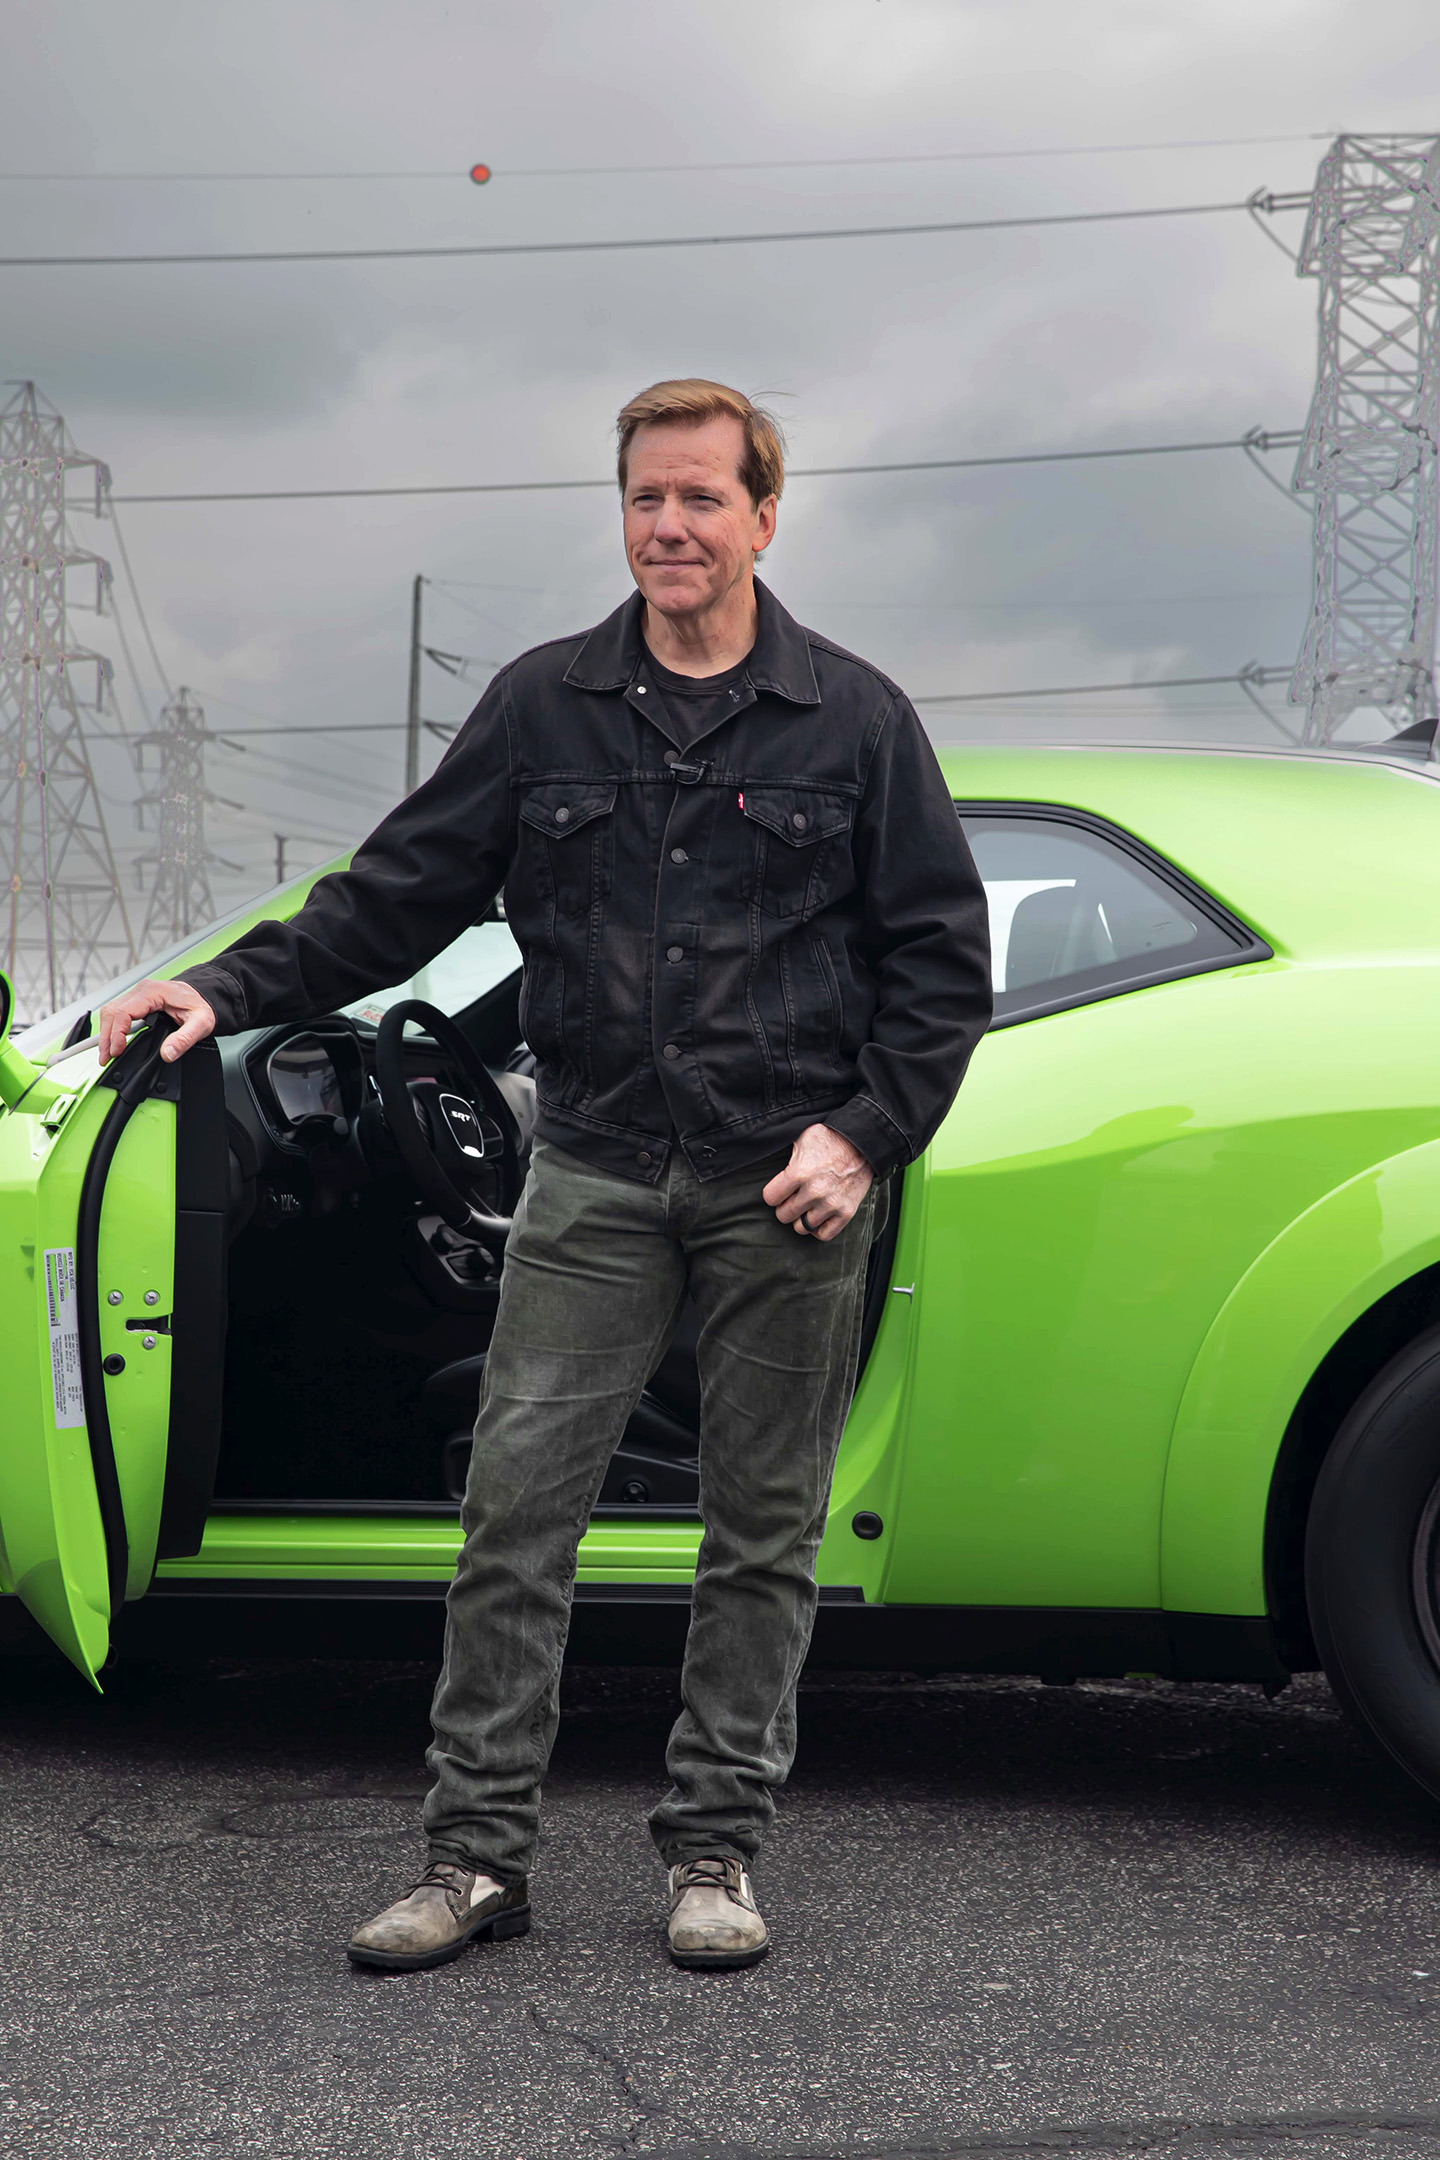 Jeff Dunham with his Direct Connection-equipped Dodge Challenger SRT Demon 170 after pulling wheelies at the drag strip